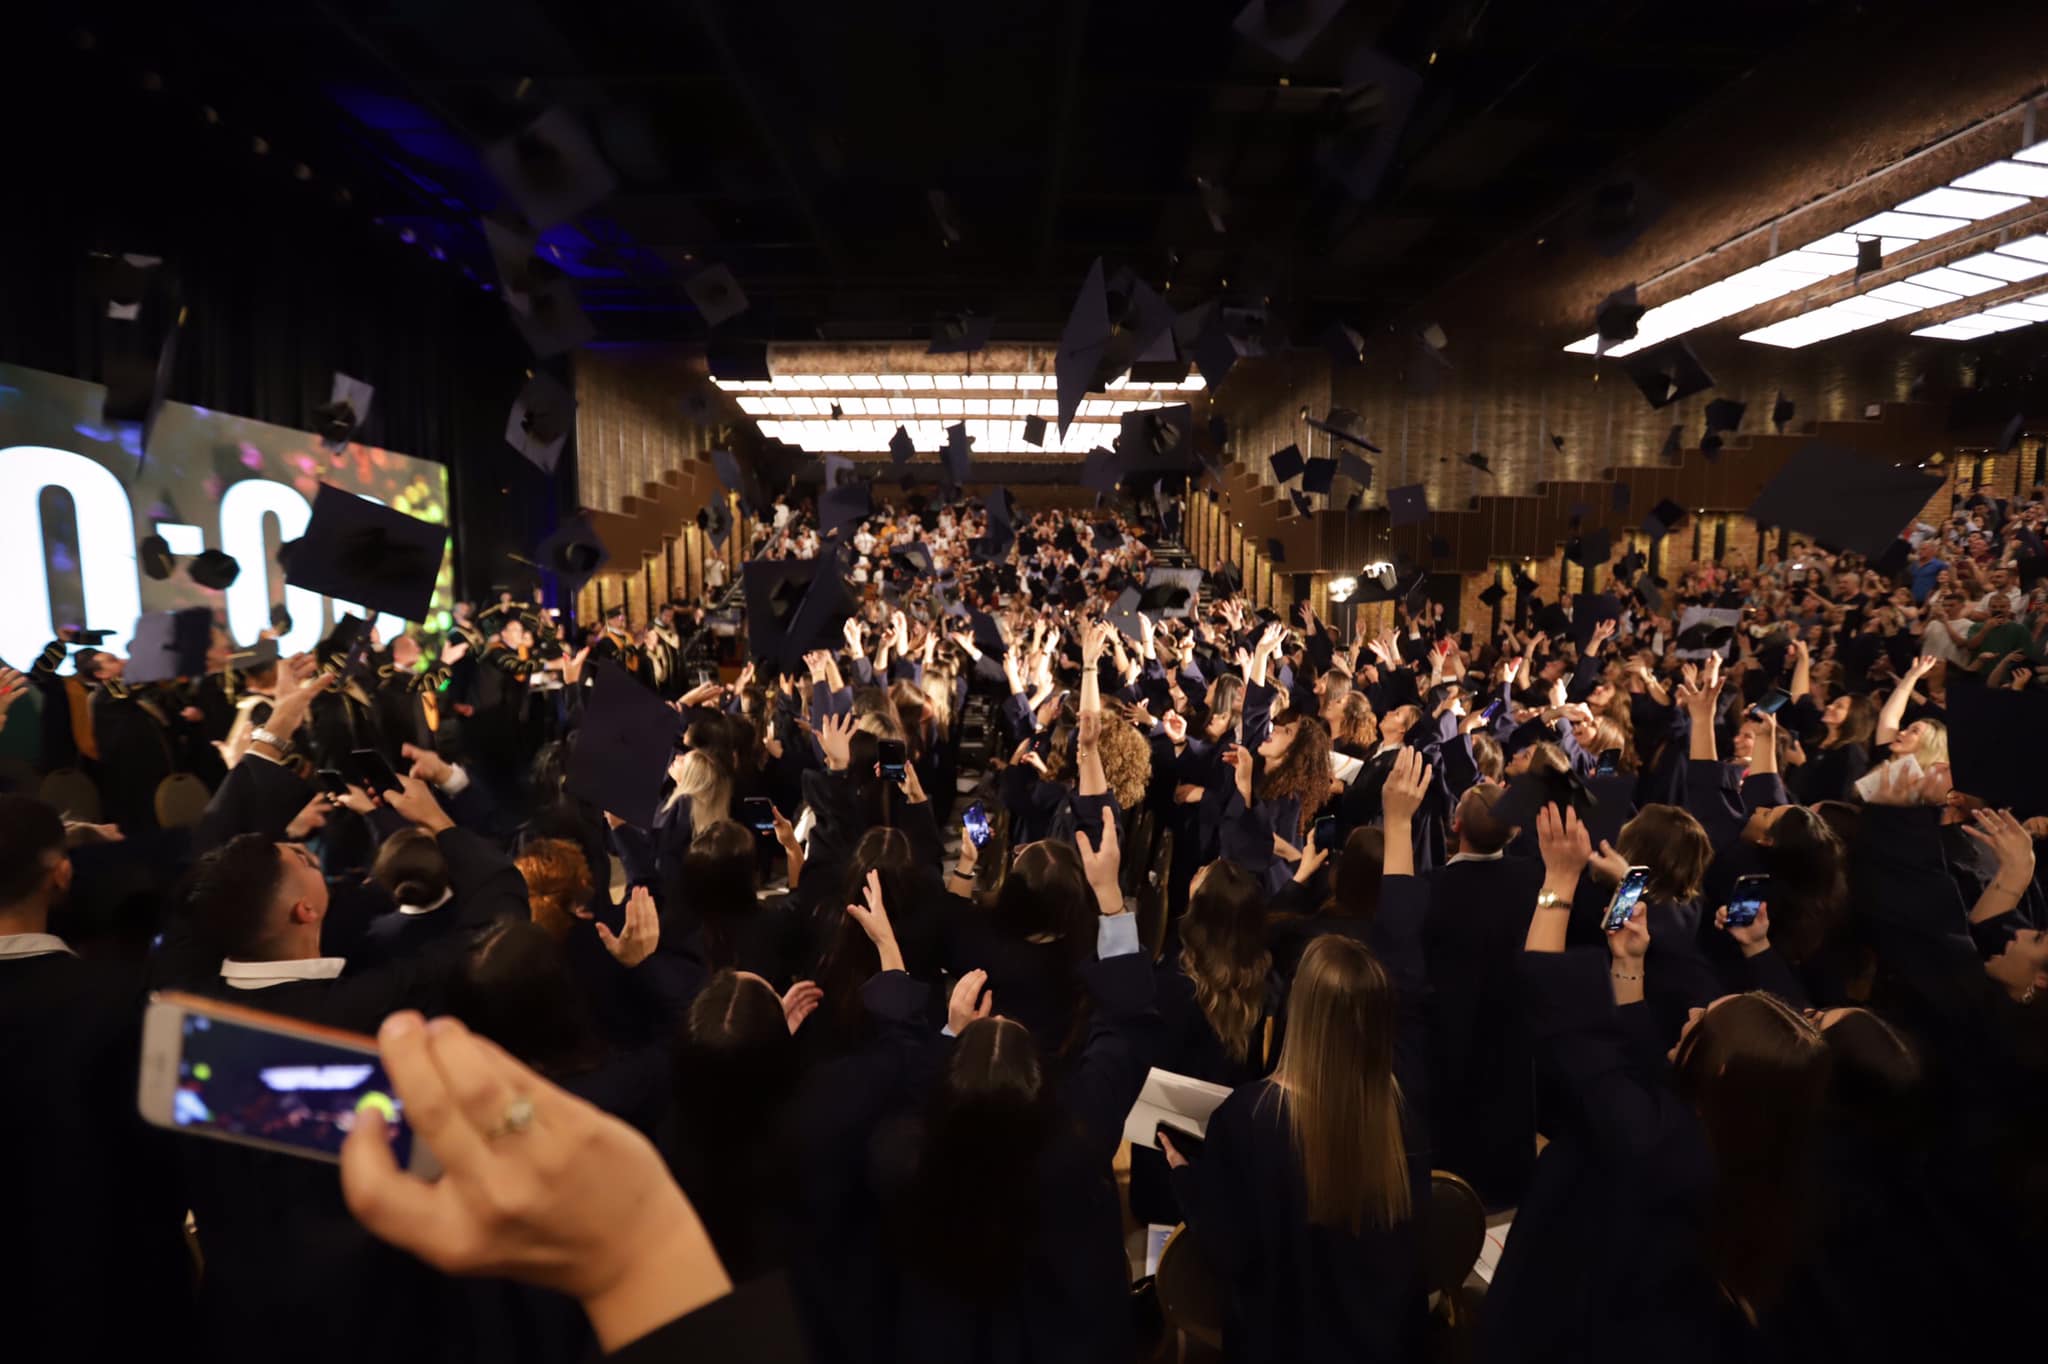 UBT successfully concluded one of the most magnificent organizations of the student graduation ceremony